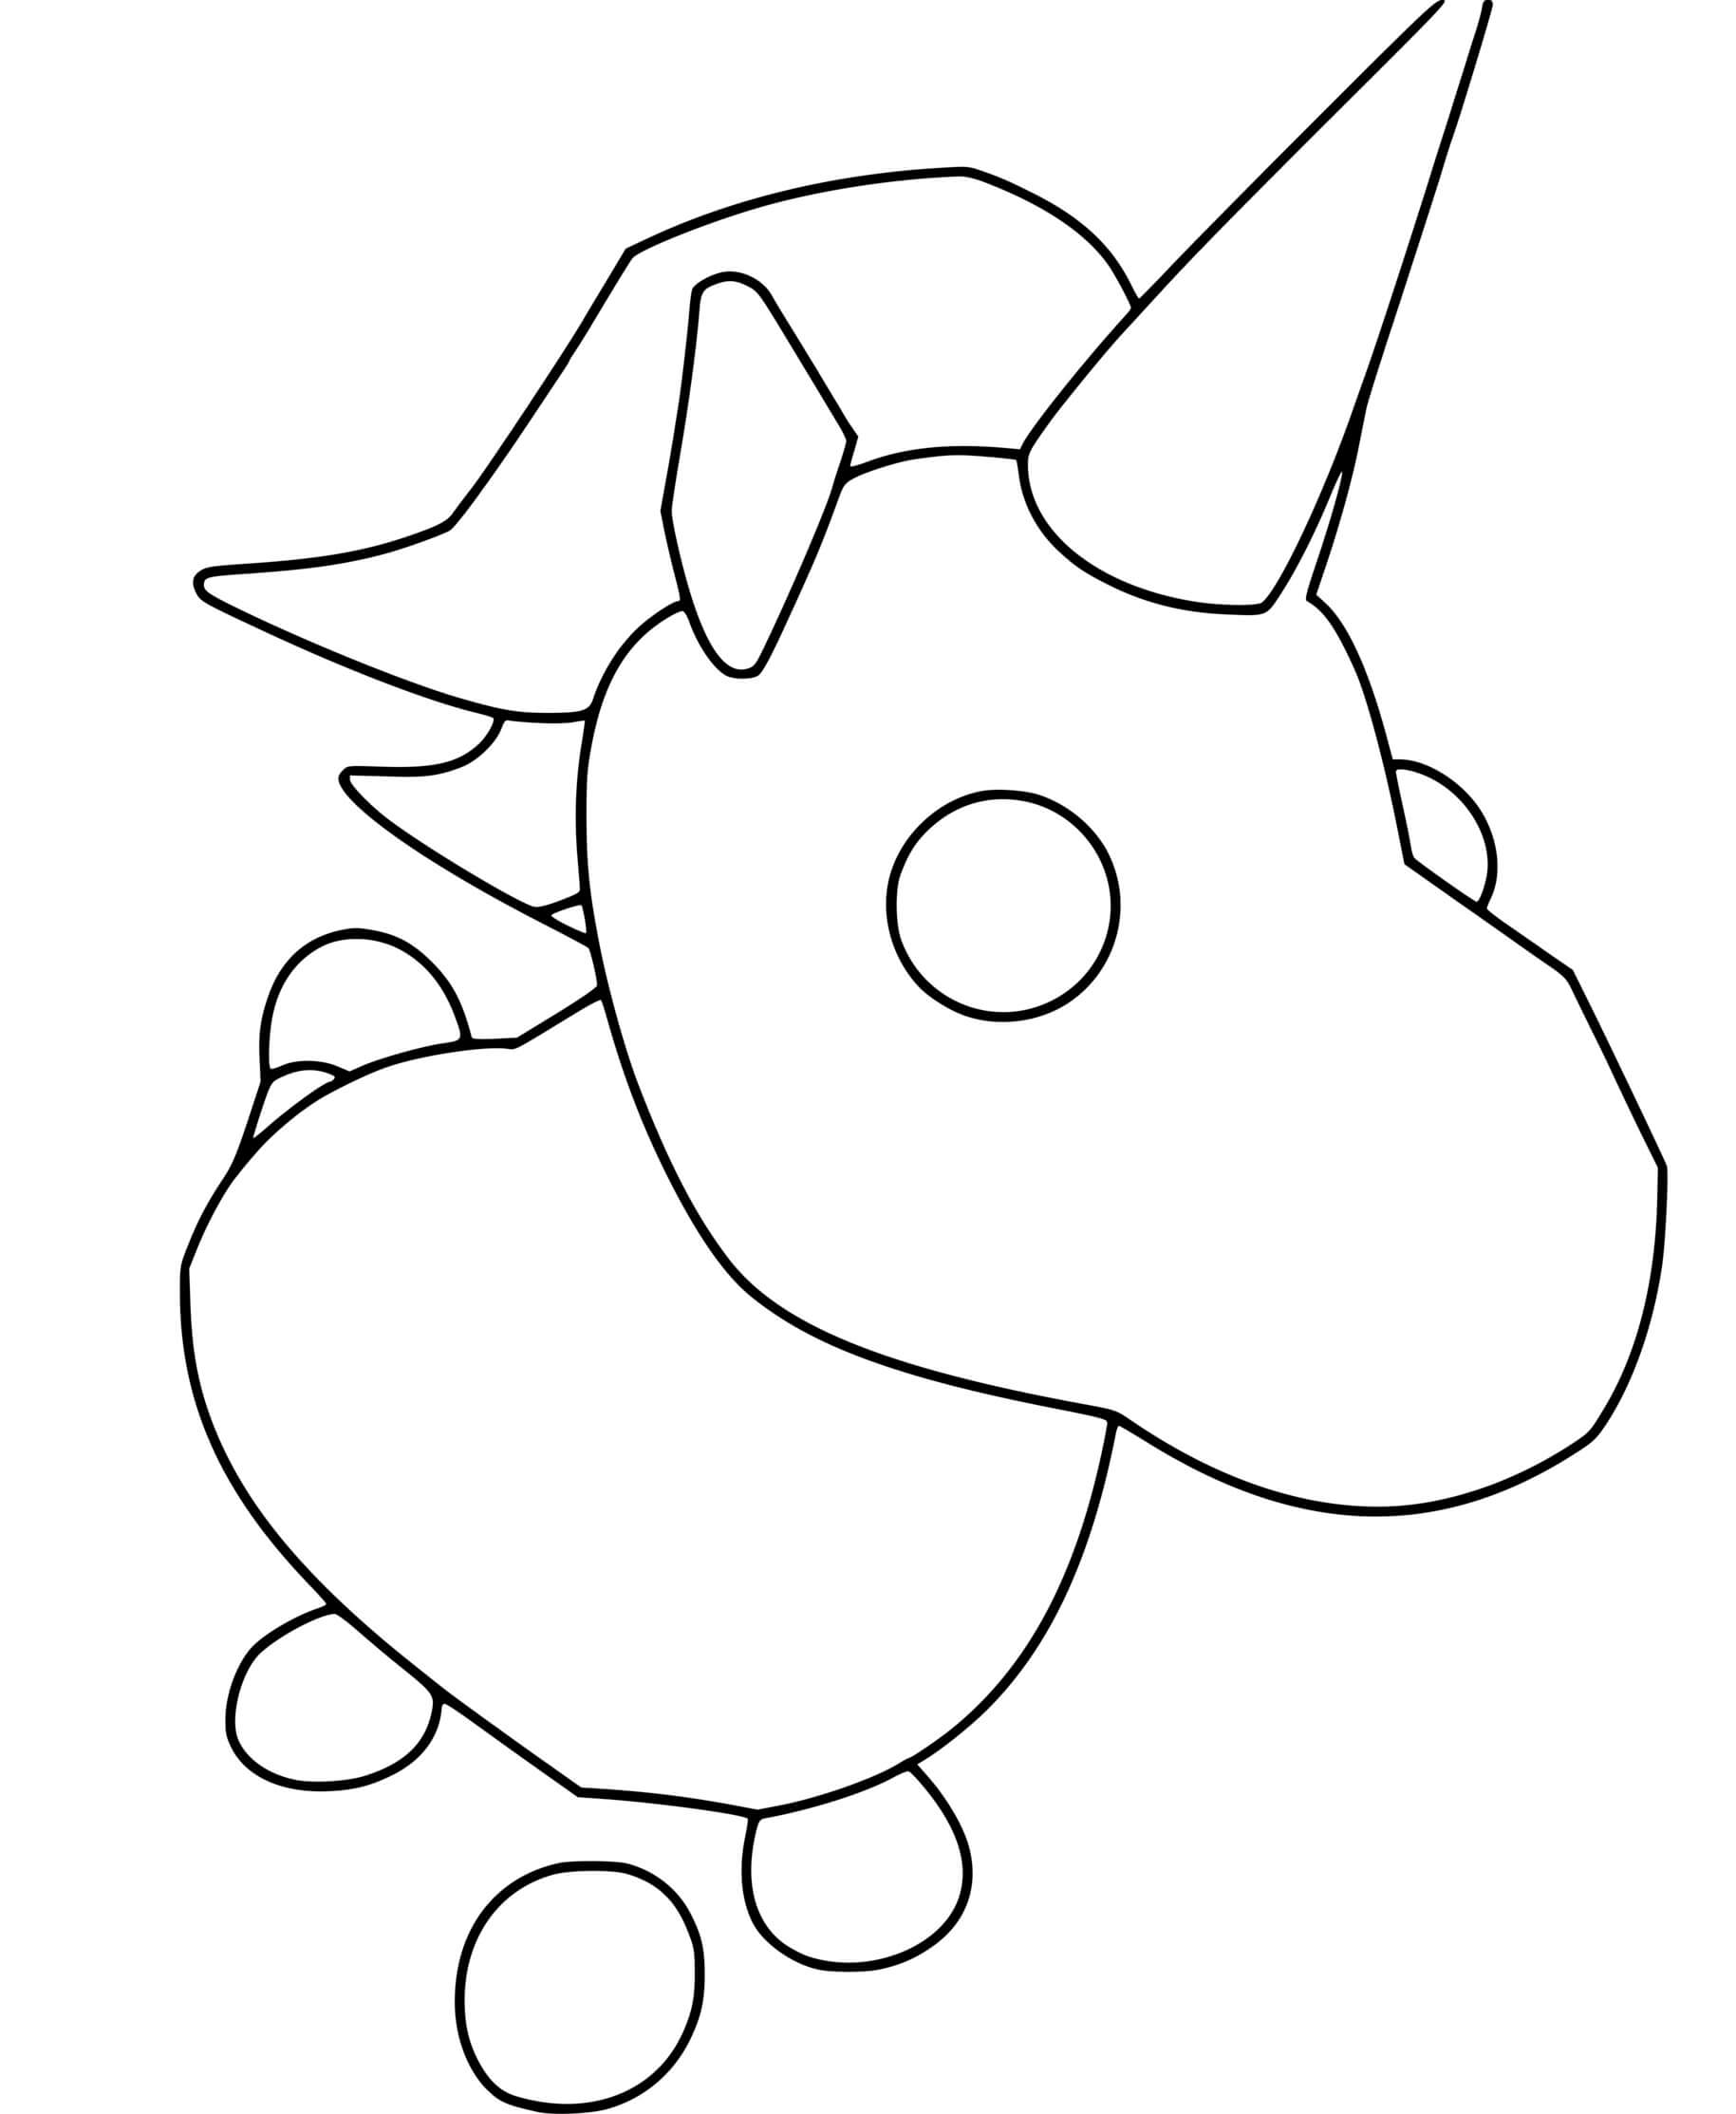 Adopt Me Unicorn Coloring Pages   Coloring Cool